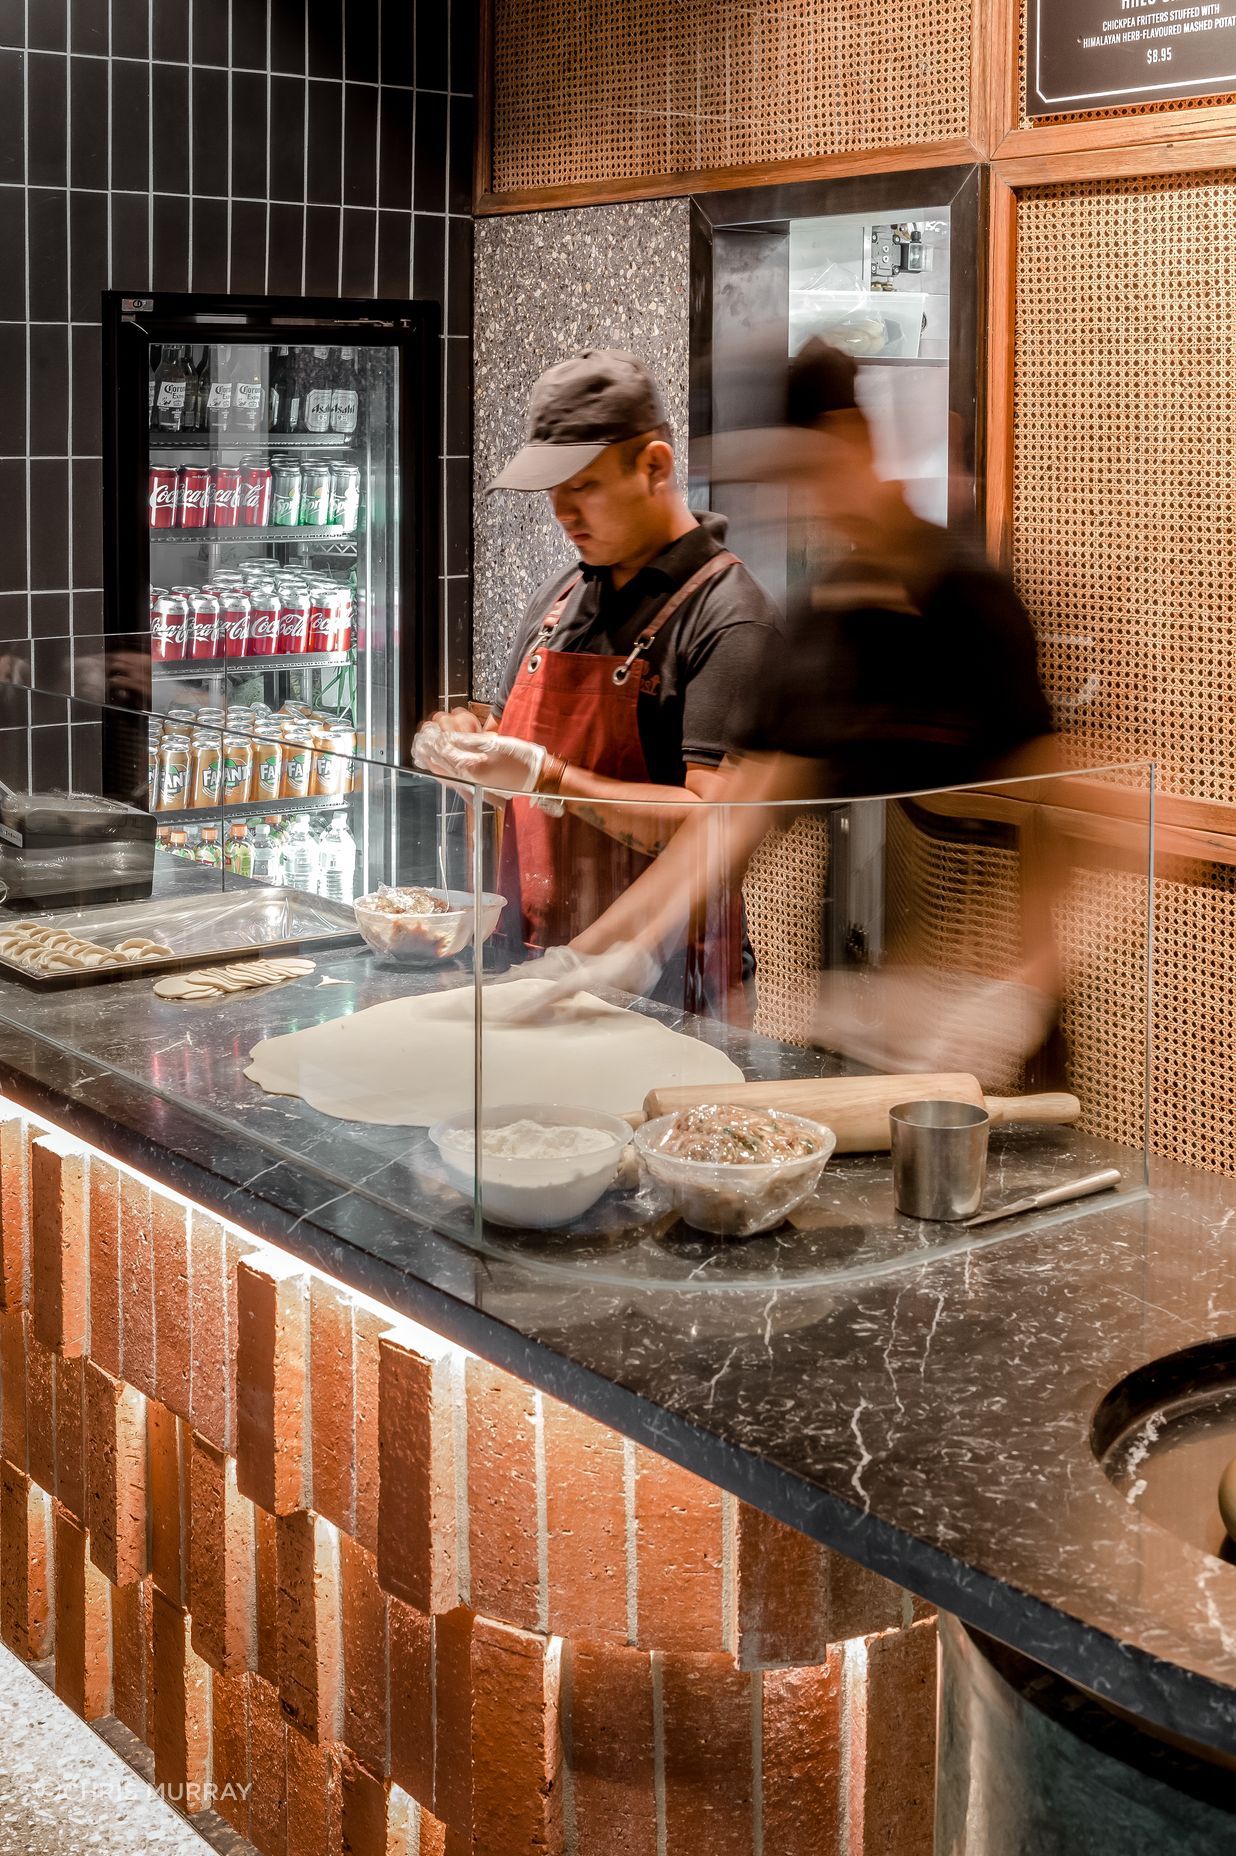 The service counter's layered effect using Rustic Red brick tiles and custom cut bricks